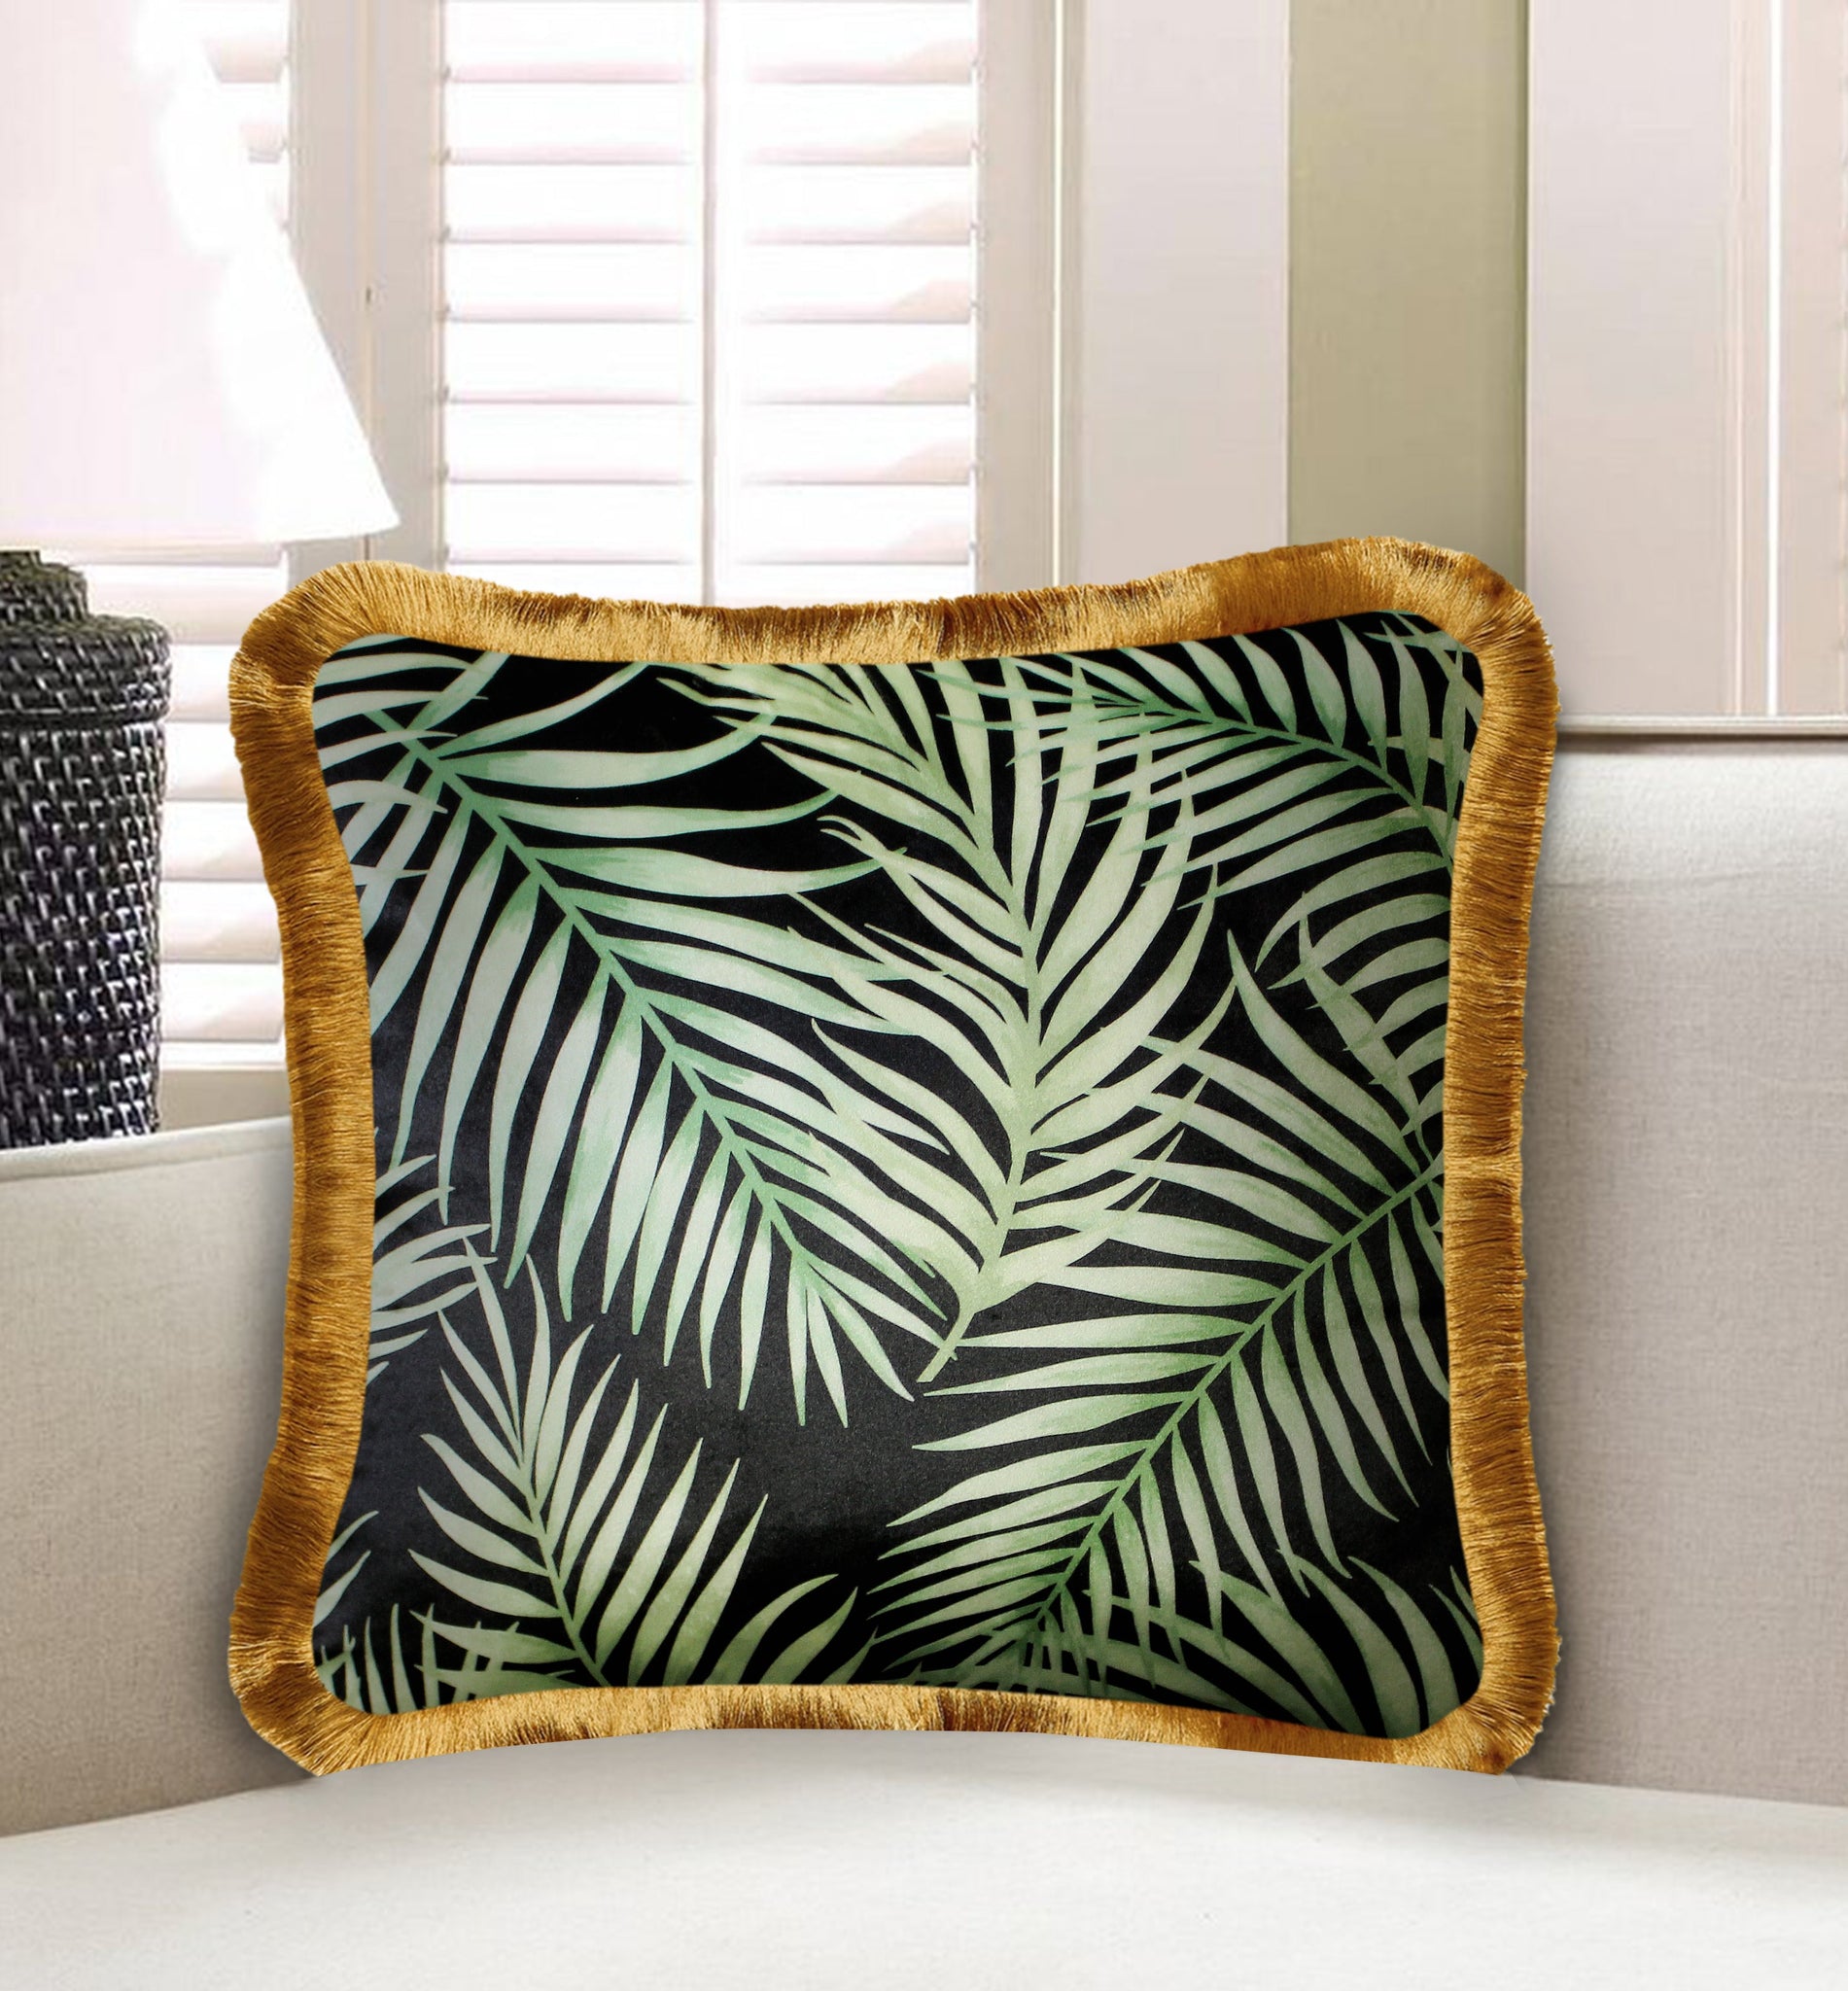 Green Velvet Cushion Cover Exotic Peacock Feather Decorative Pillowcase Modern Home Décor Throw Pillow for Sofa Chair Couch Bedroom 45x45 cm 18x18 In